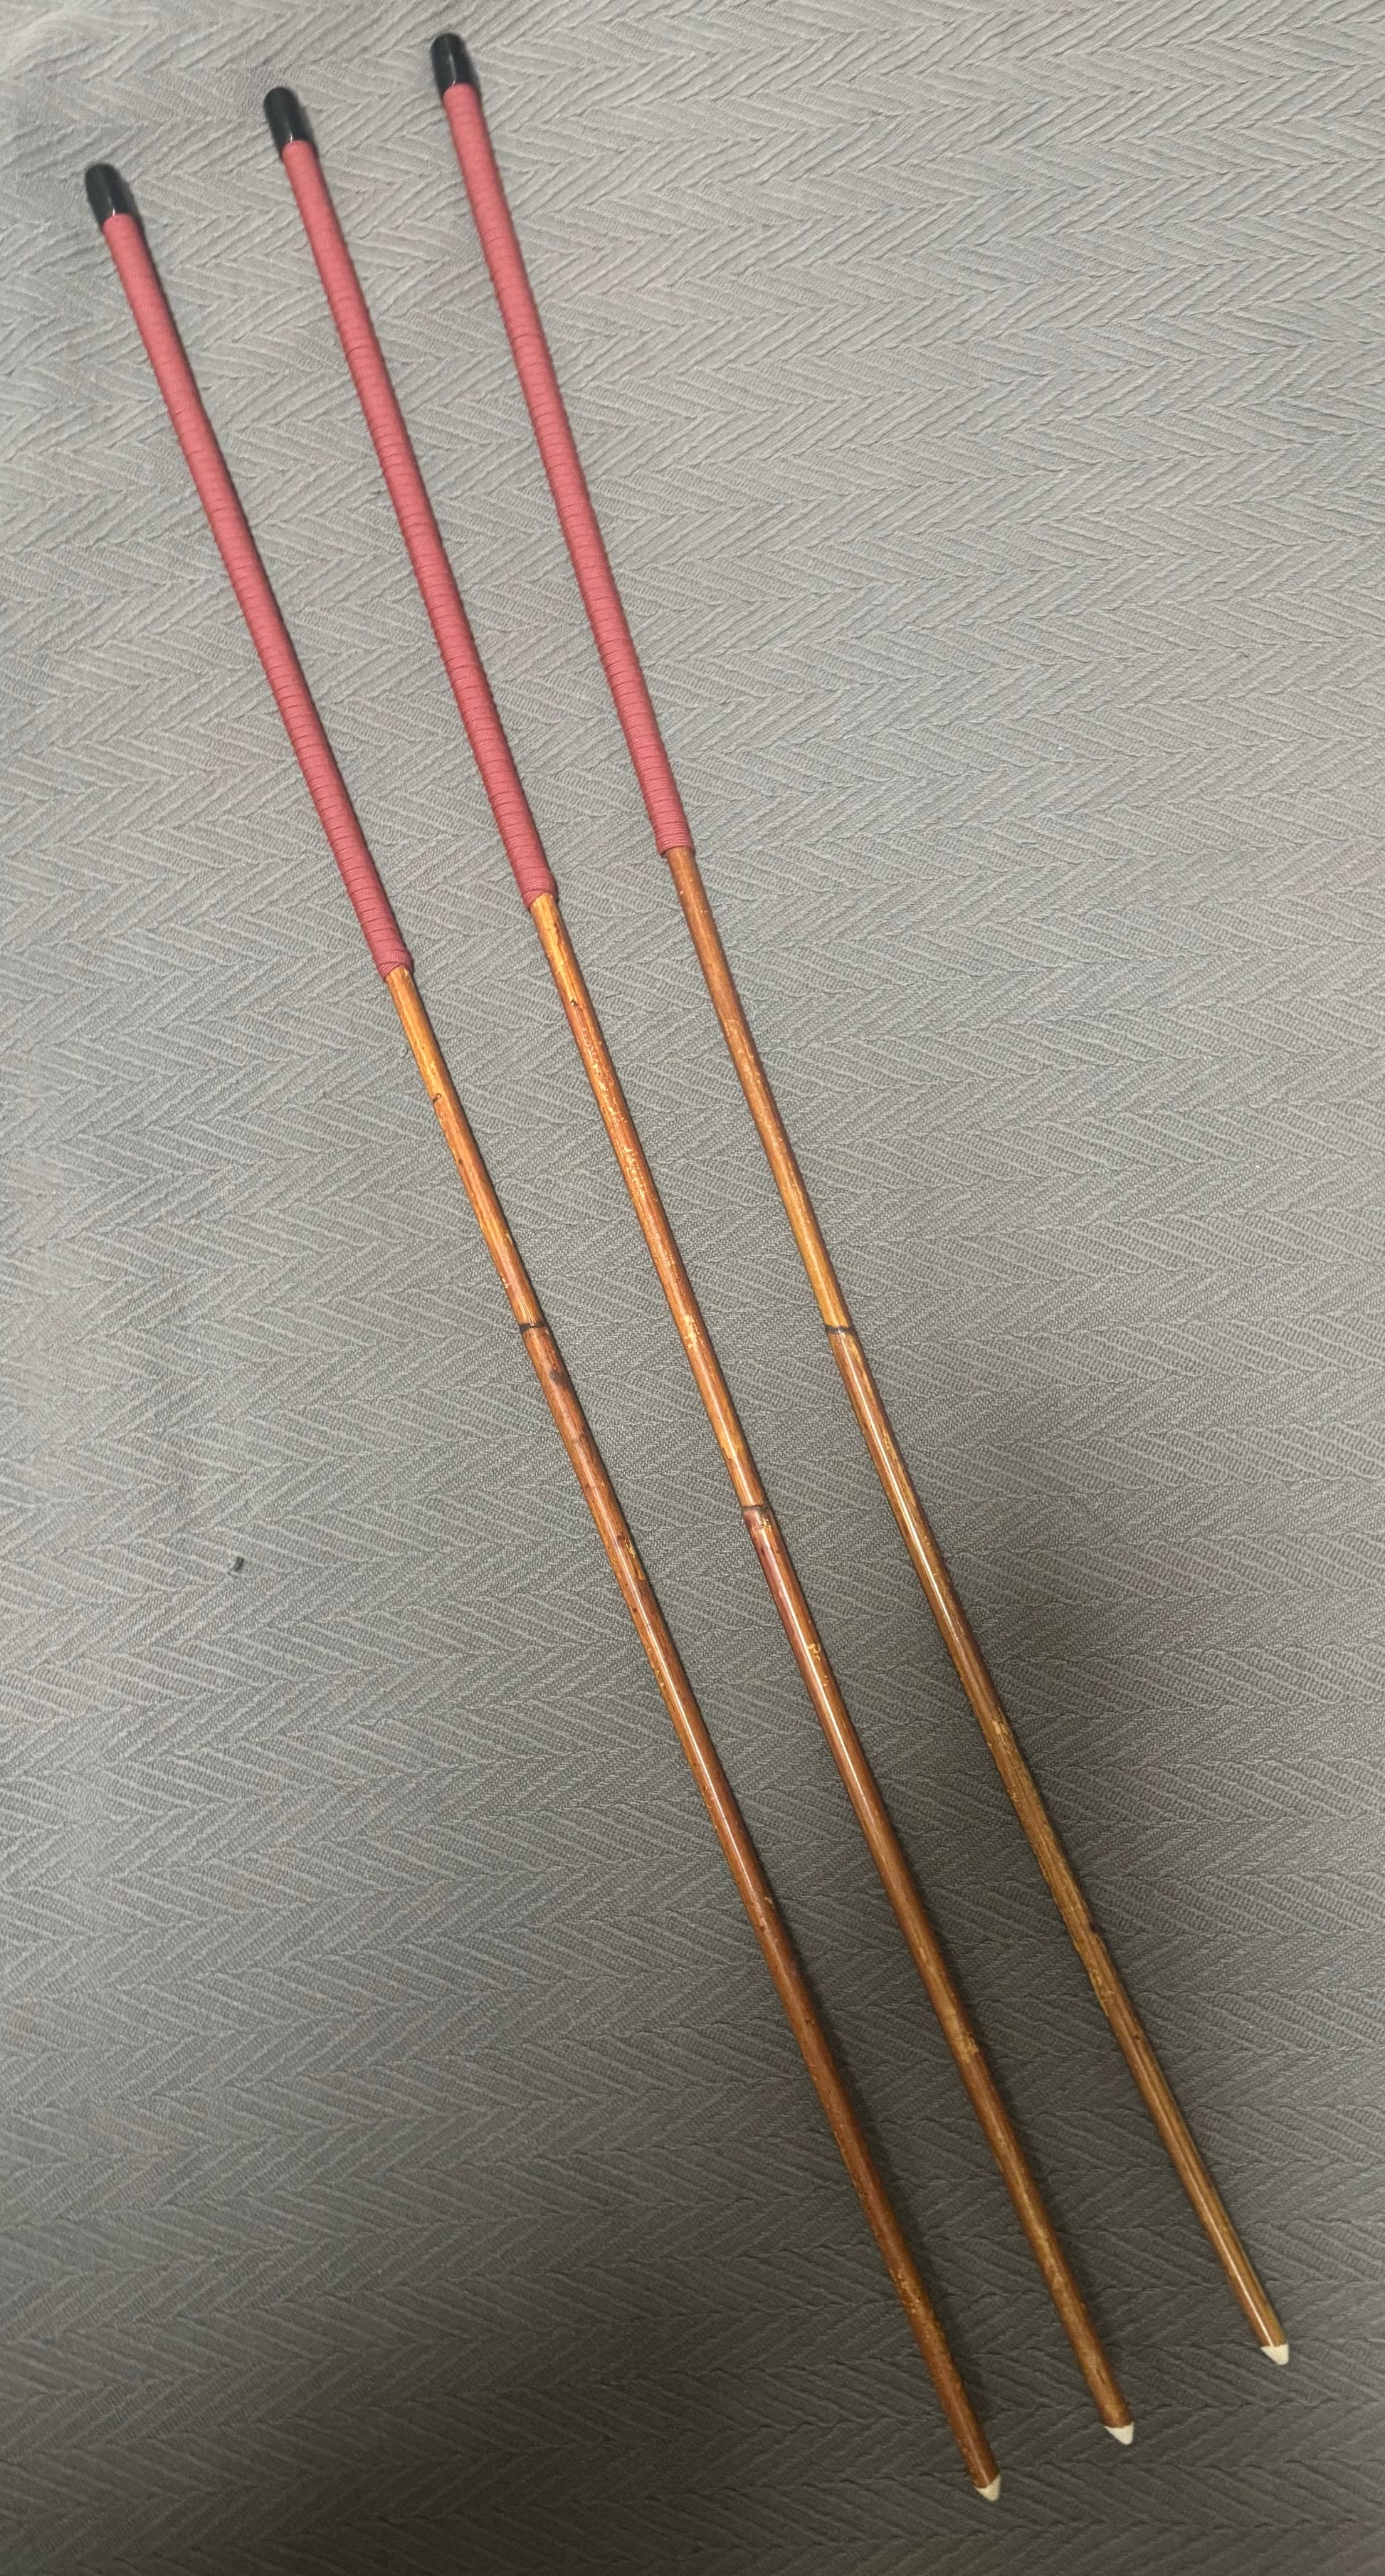 Set of 3 Smoked Dragon Rattan Canes with Imperial Red Paracord Handles - 95 to 98 cms L - 10 - 11.5 mm D - Englishvice Canes